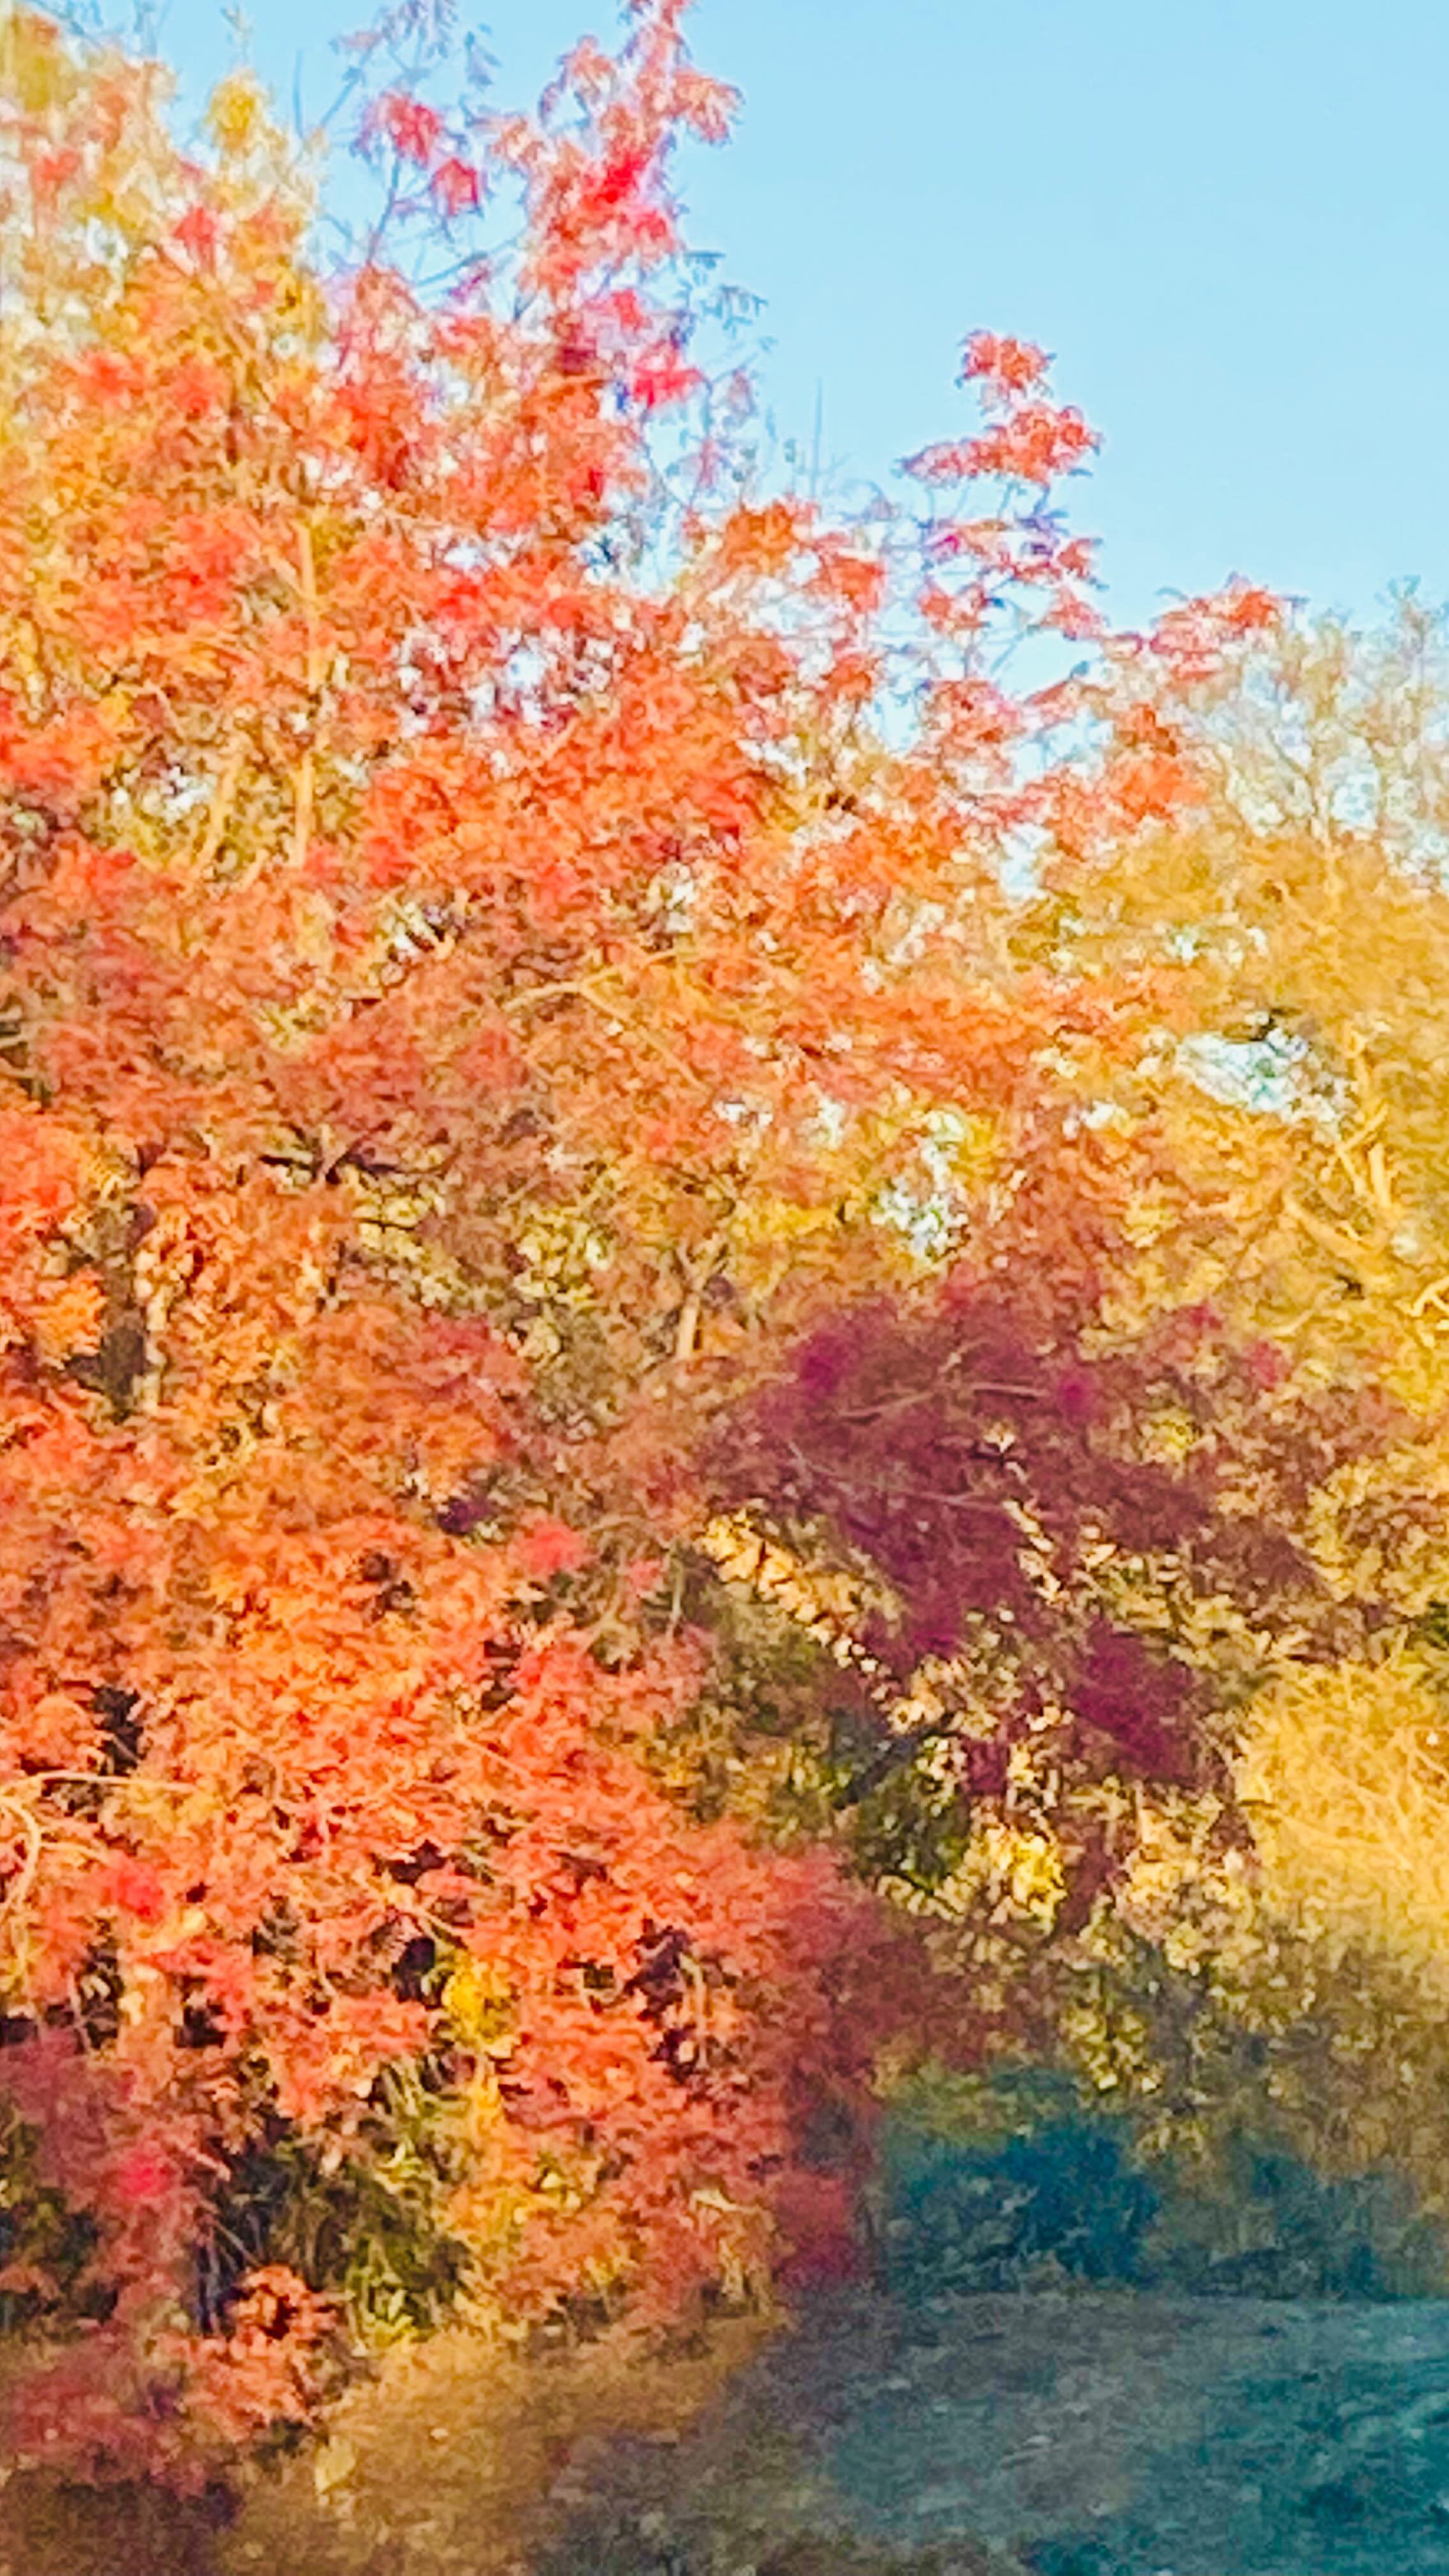 Look Up…
Happy Saturday - take time to spot the little moments that can bring you joy 🍂🍁

#beautyswhereyoufindit #upscalerural #outdoors #fallleaves #fallcolors #mothernature #zen #peace #trusttheprocess #keepingitrealcaregiving #substack